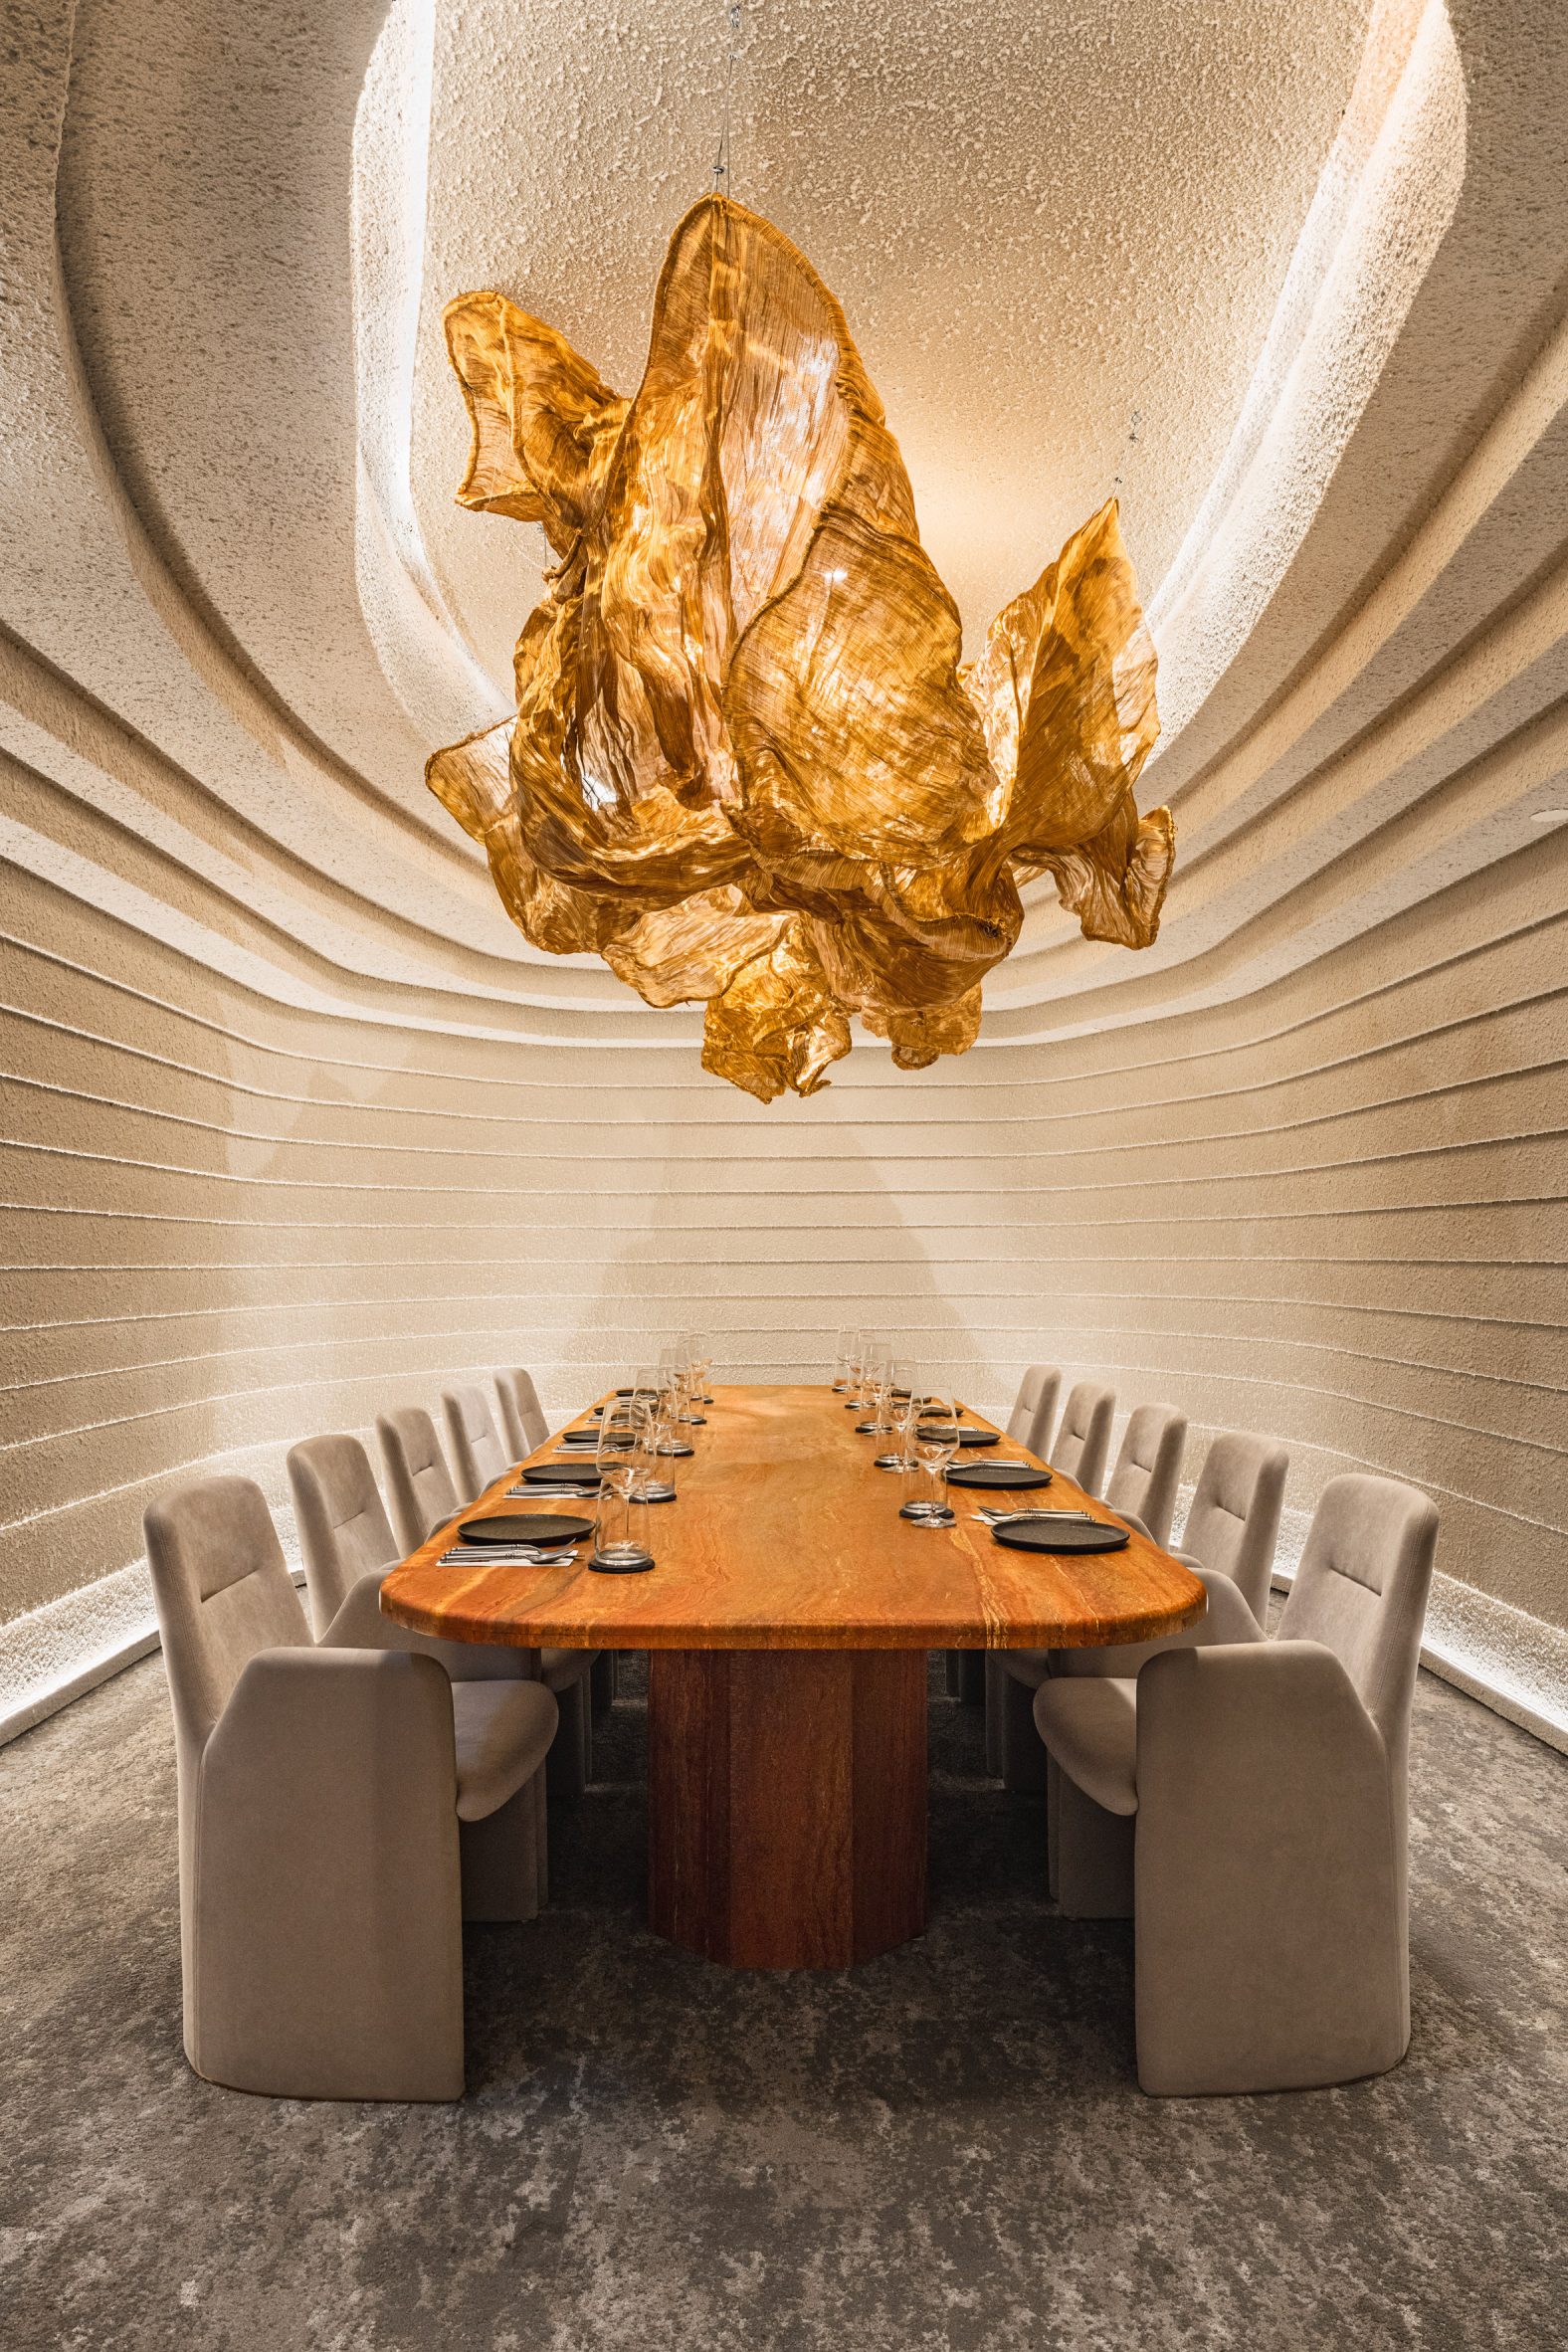 Stucco-clad private dining room